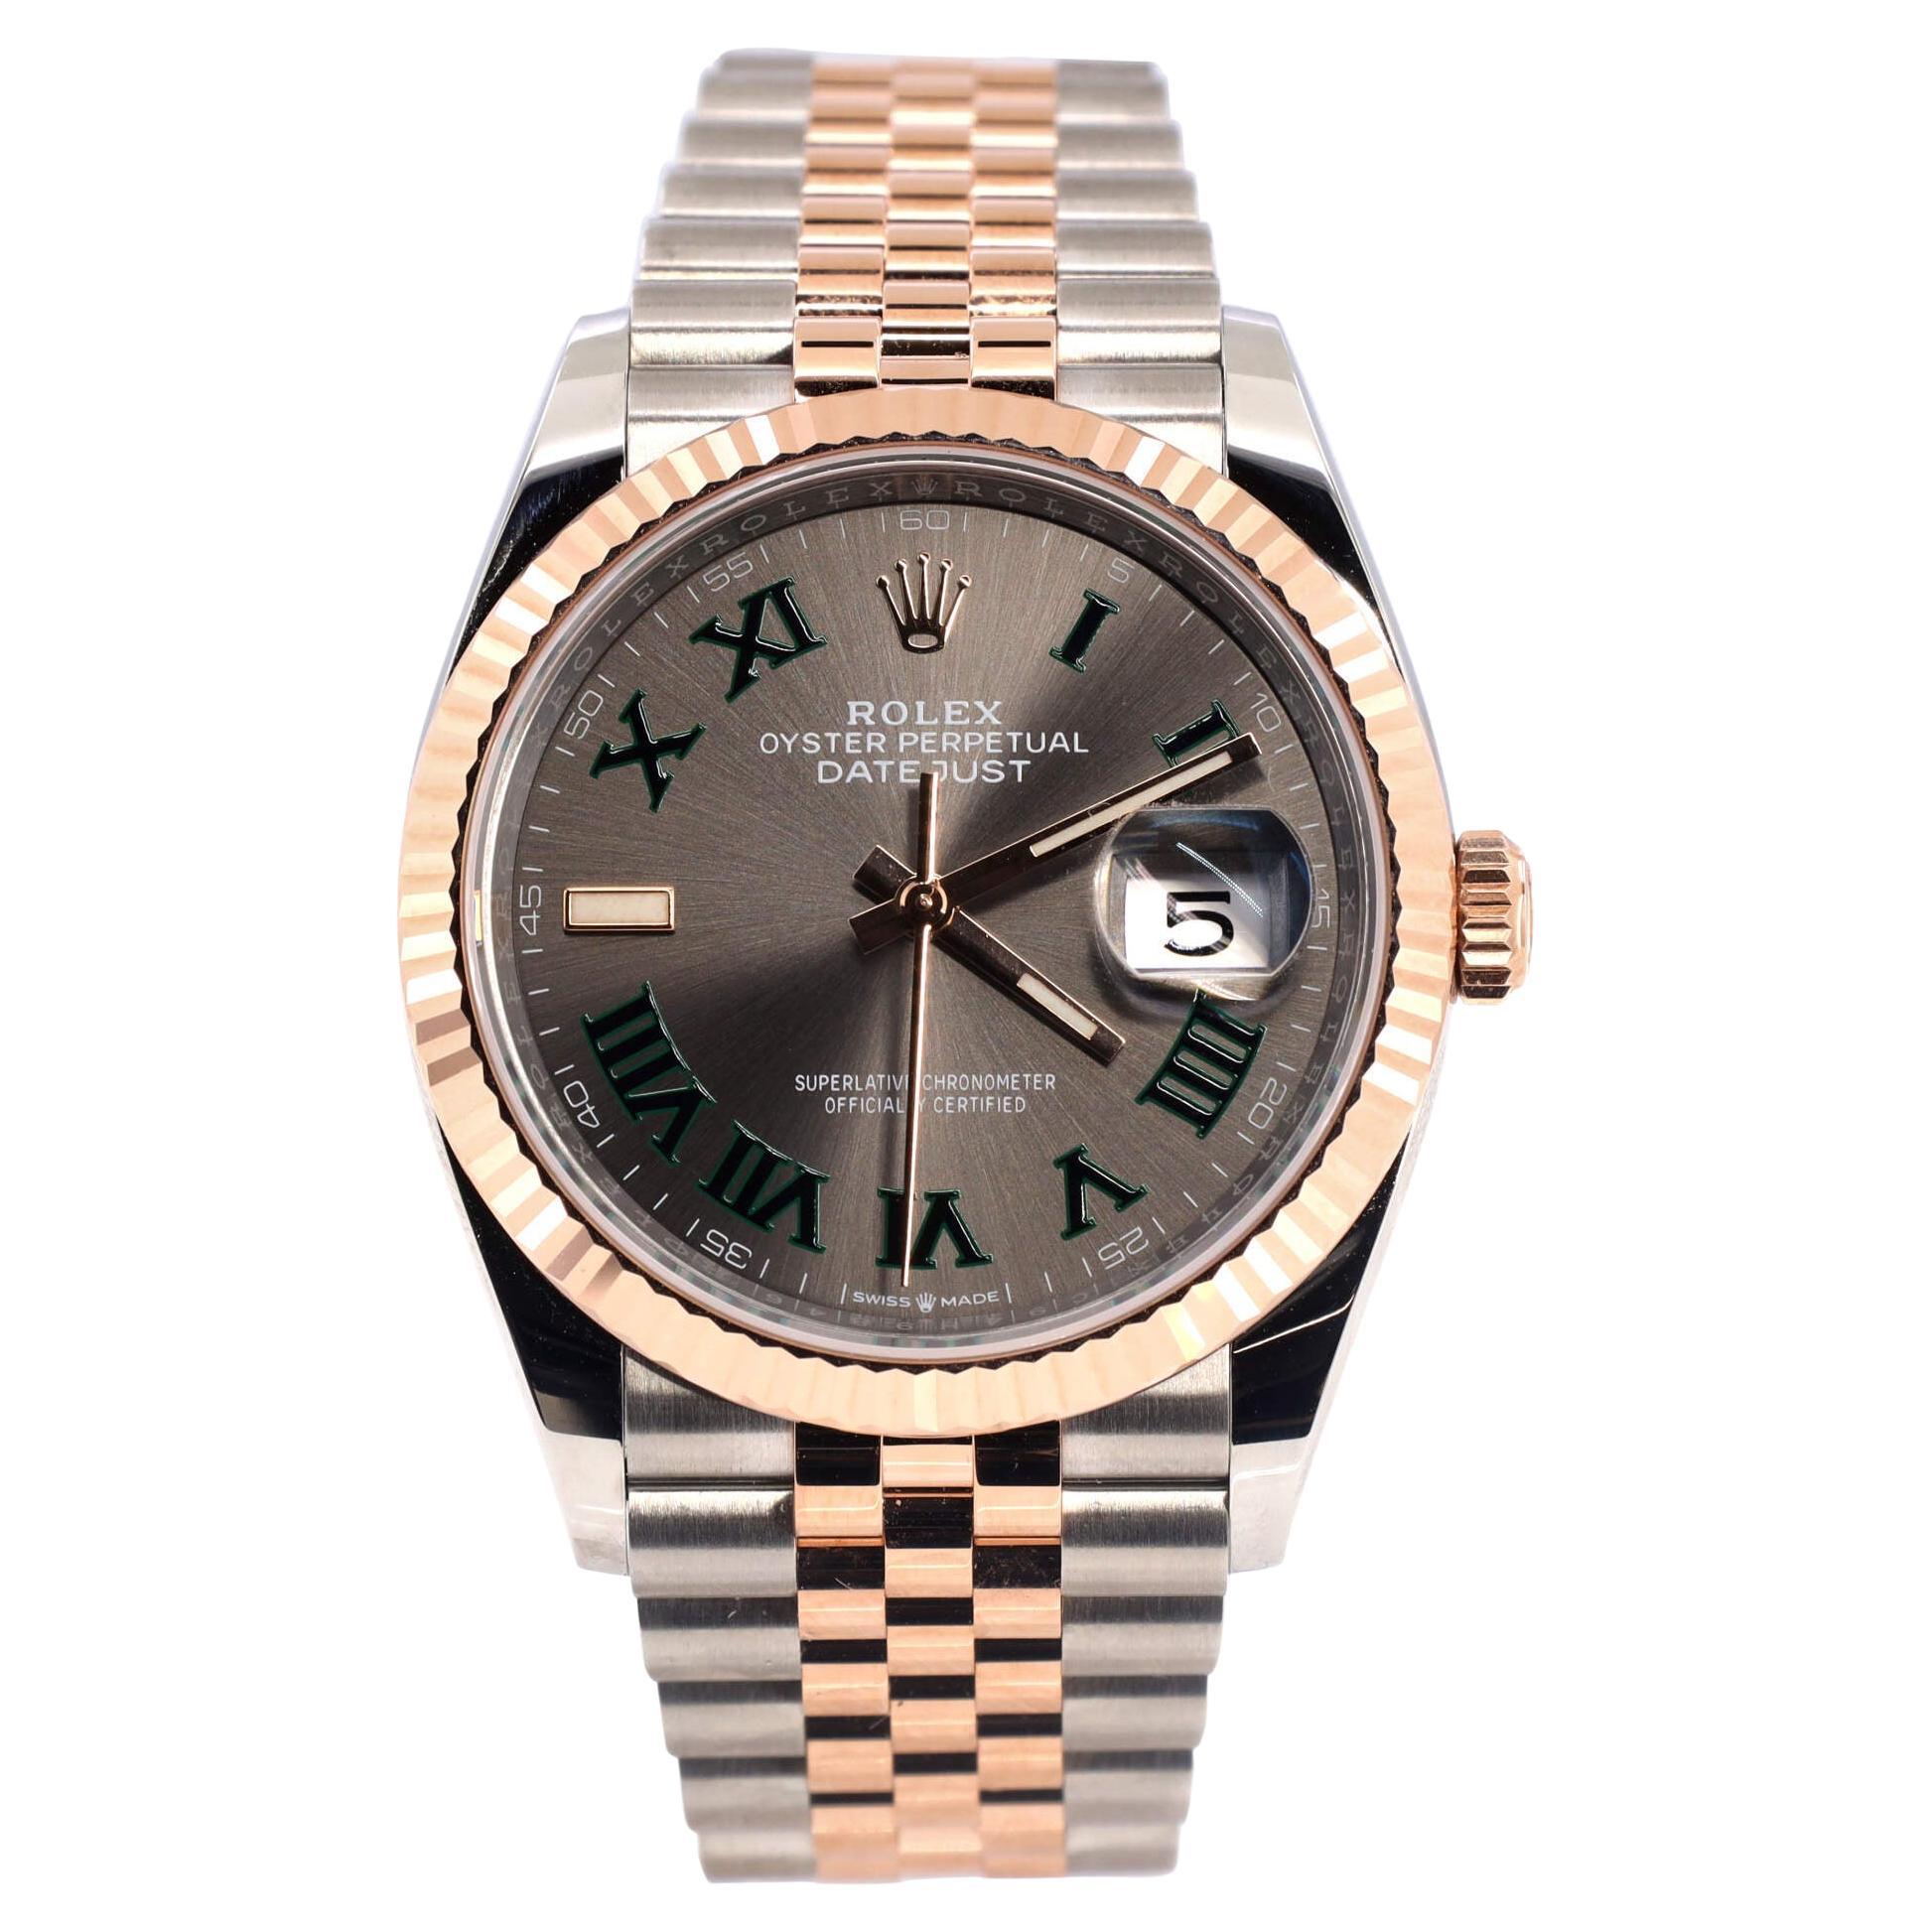 Rolex Oyster Perpetual Datejust Wimbledon Automatic Watch Stainless Steel